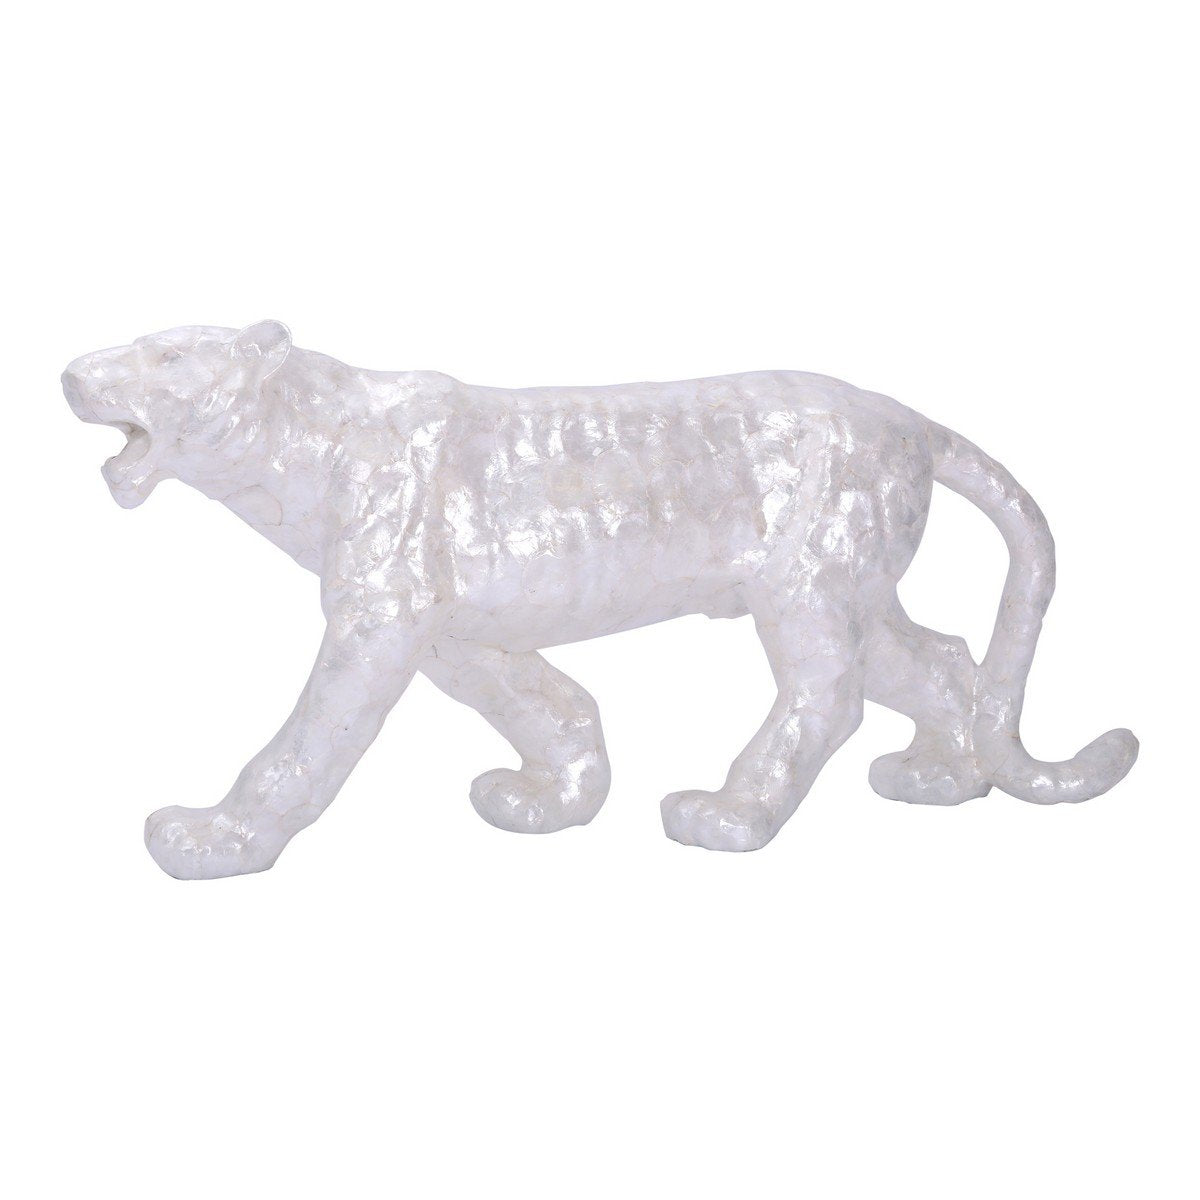 Moe's Home Collection Bengal Tiger Statue - JT-1003-18 - Moe's Home Collection - Art - Minimal And Modern - 1